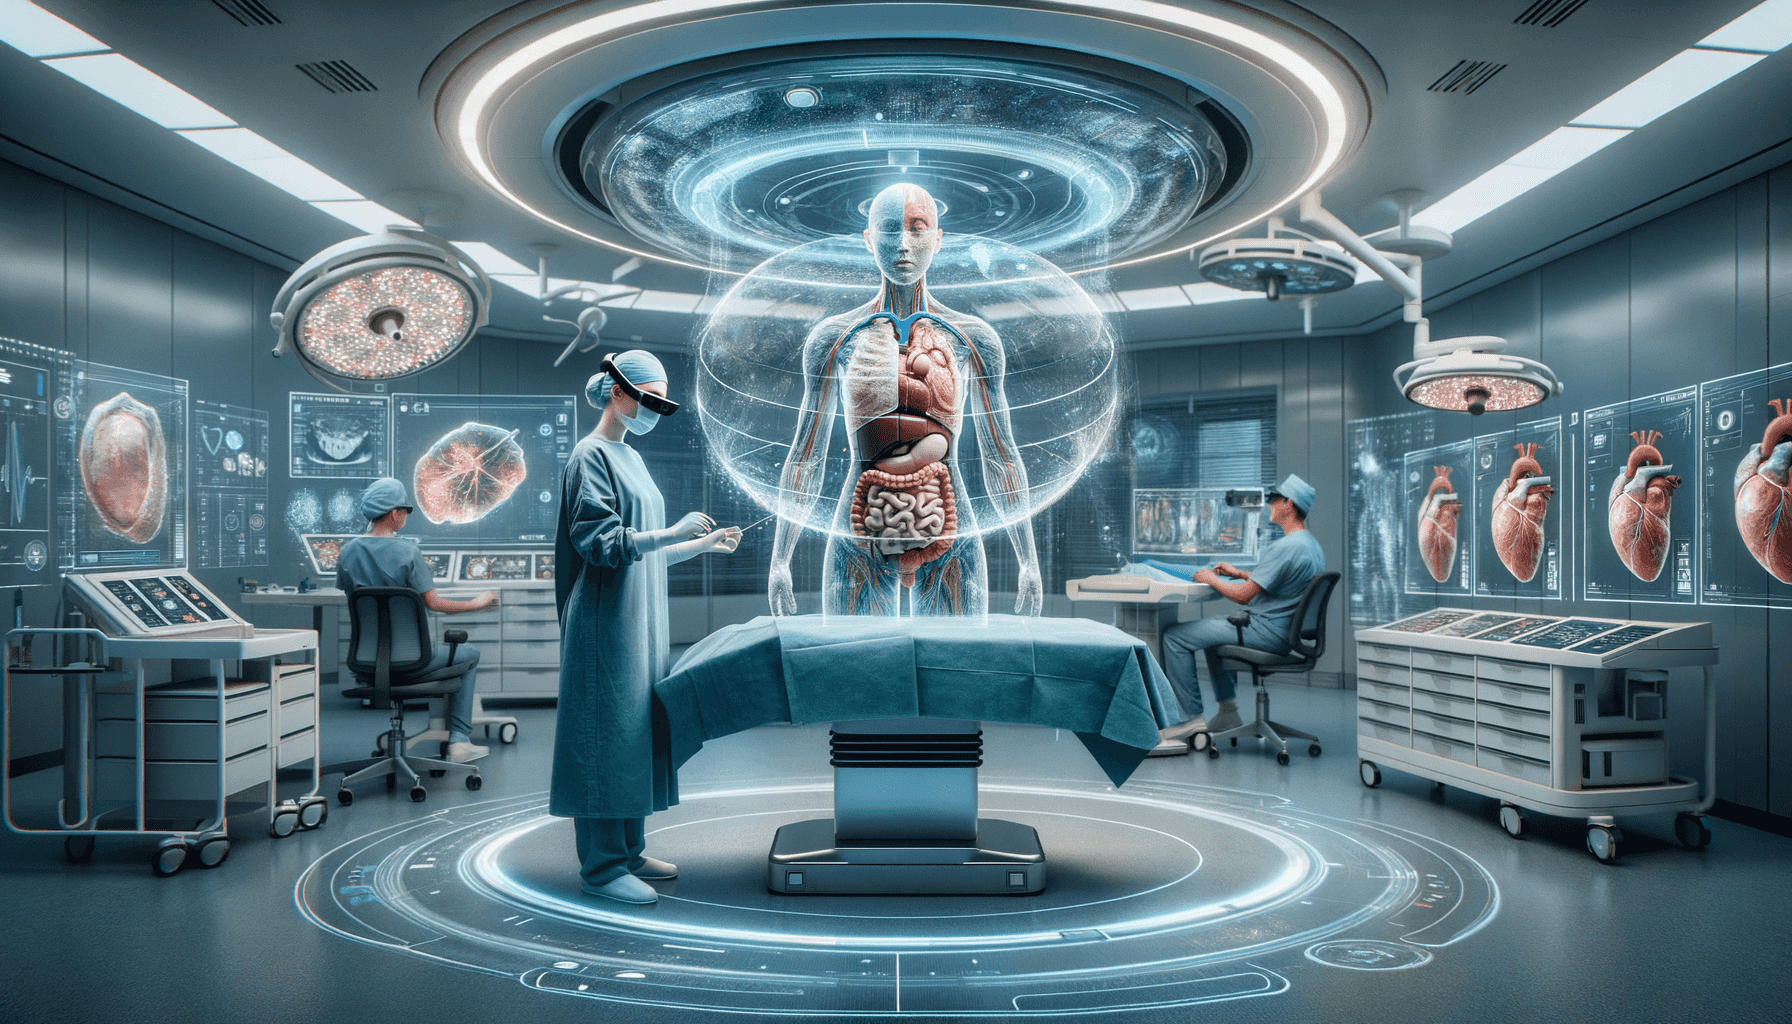 "Surgeon performing precision operation with Augmented Reality overlays, showcasing Gravity Jack's AR in medical advancements for education and patient care."